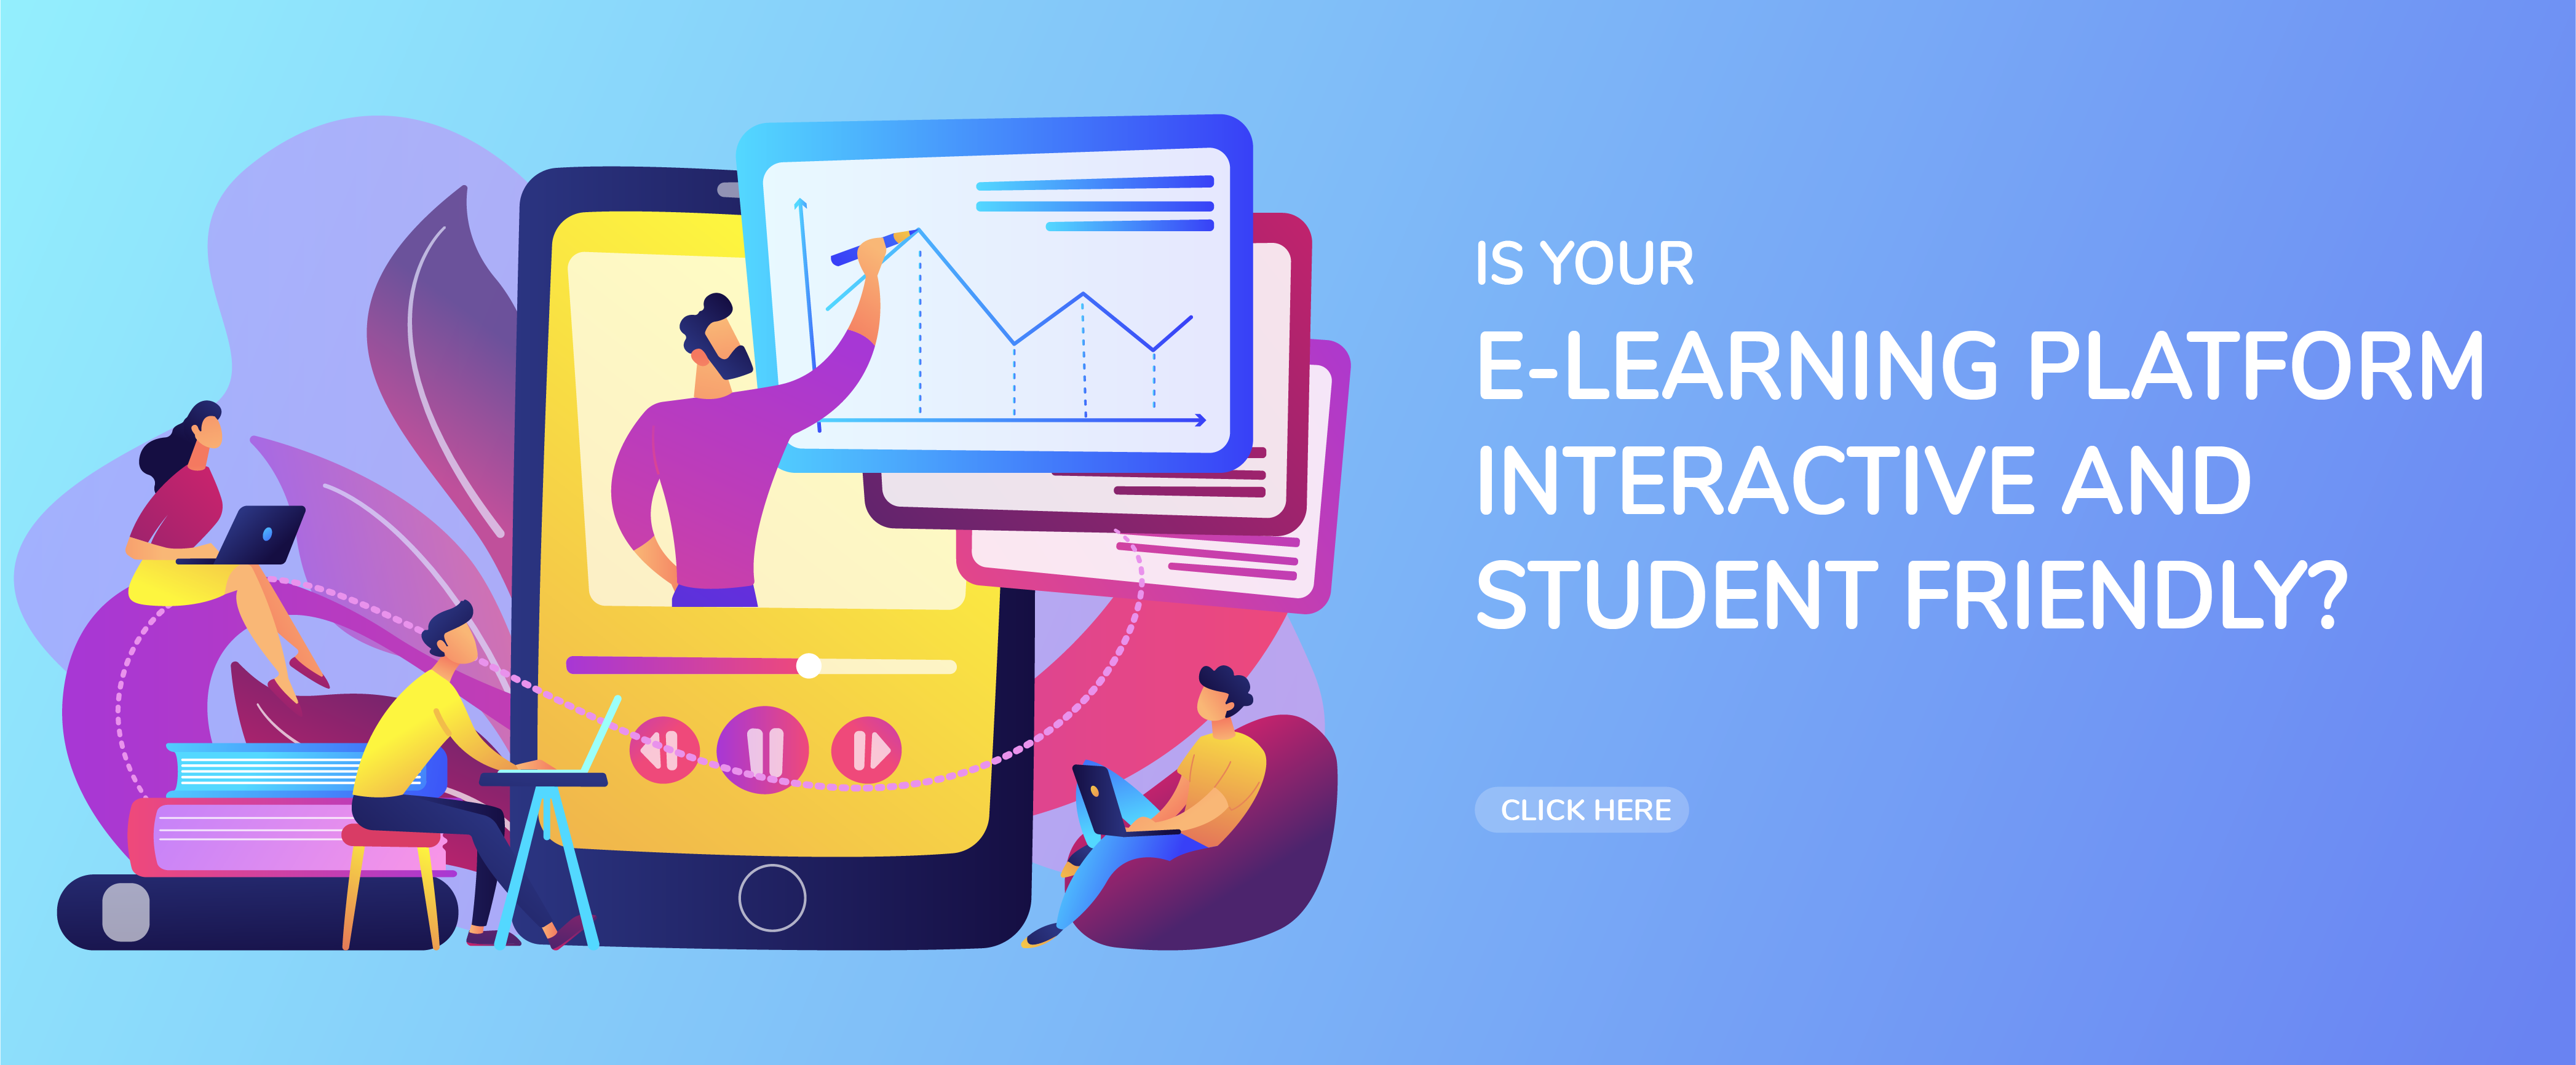 Is your e-learning platform interactive and student friendly? - Edukit